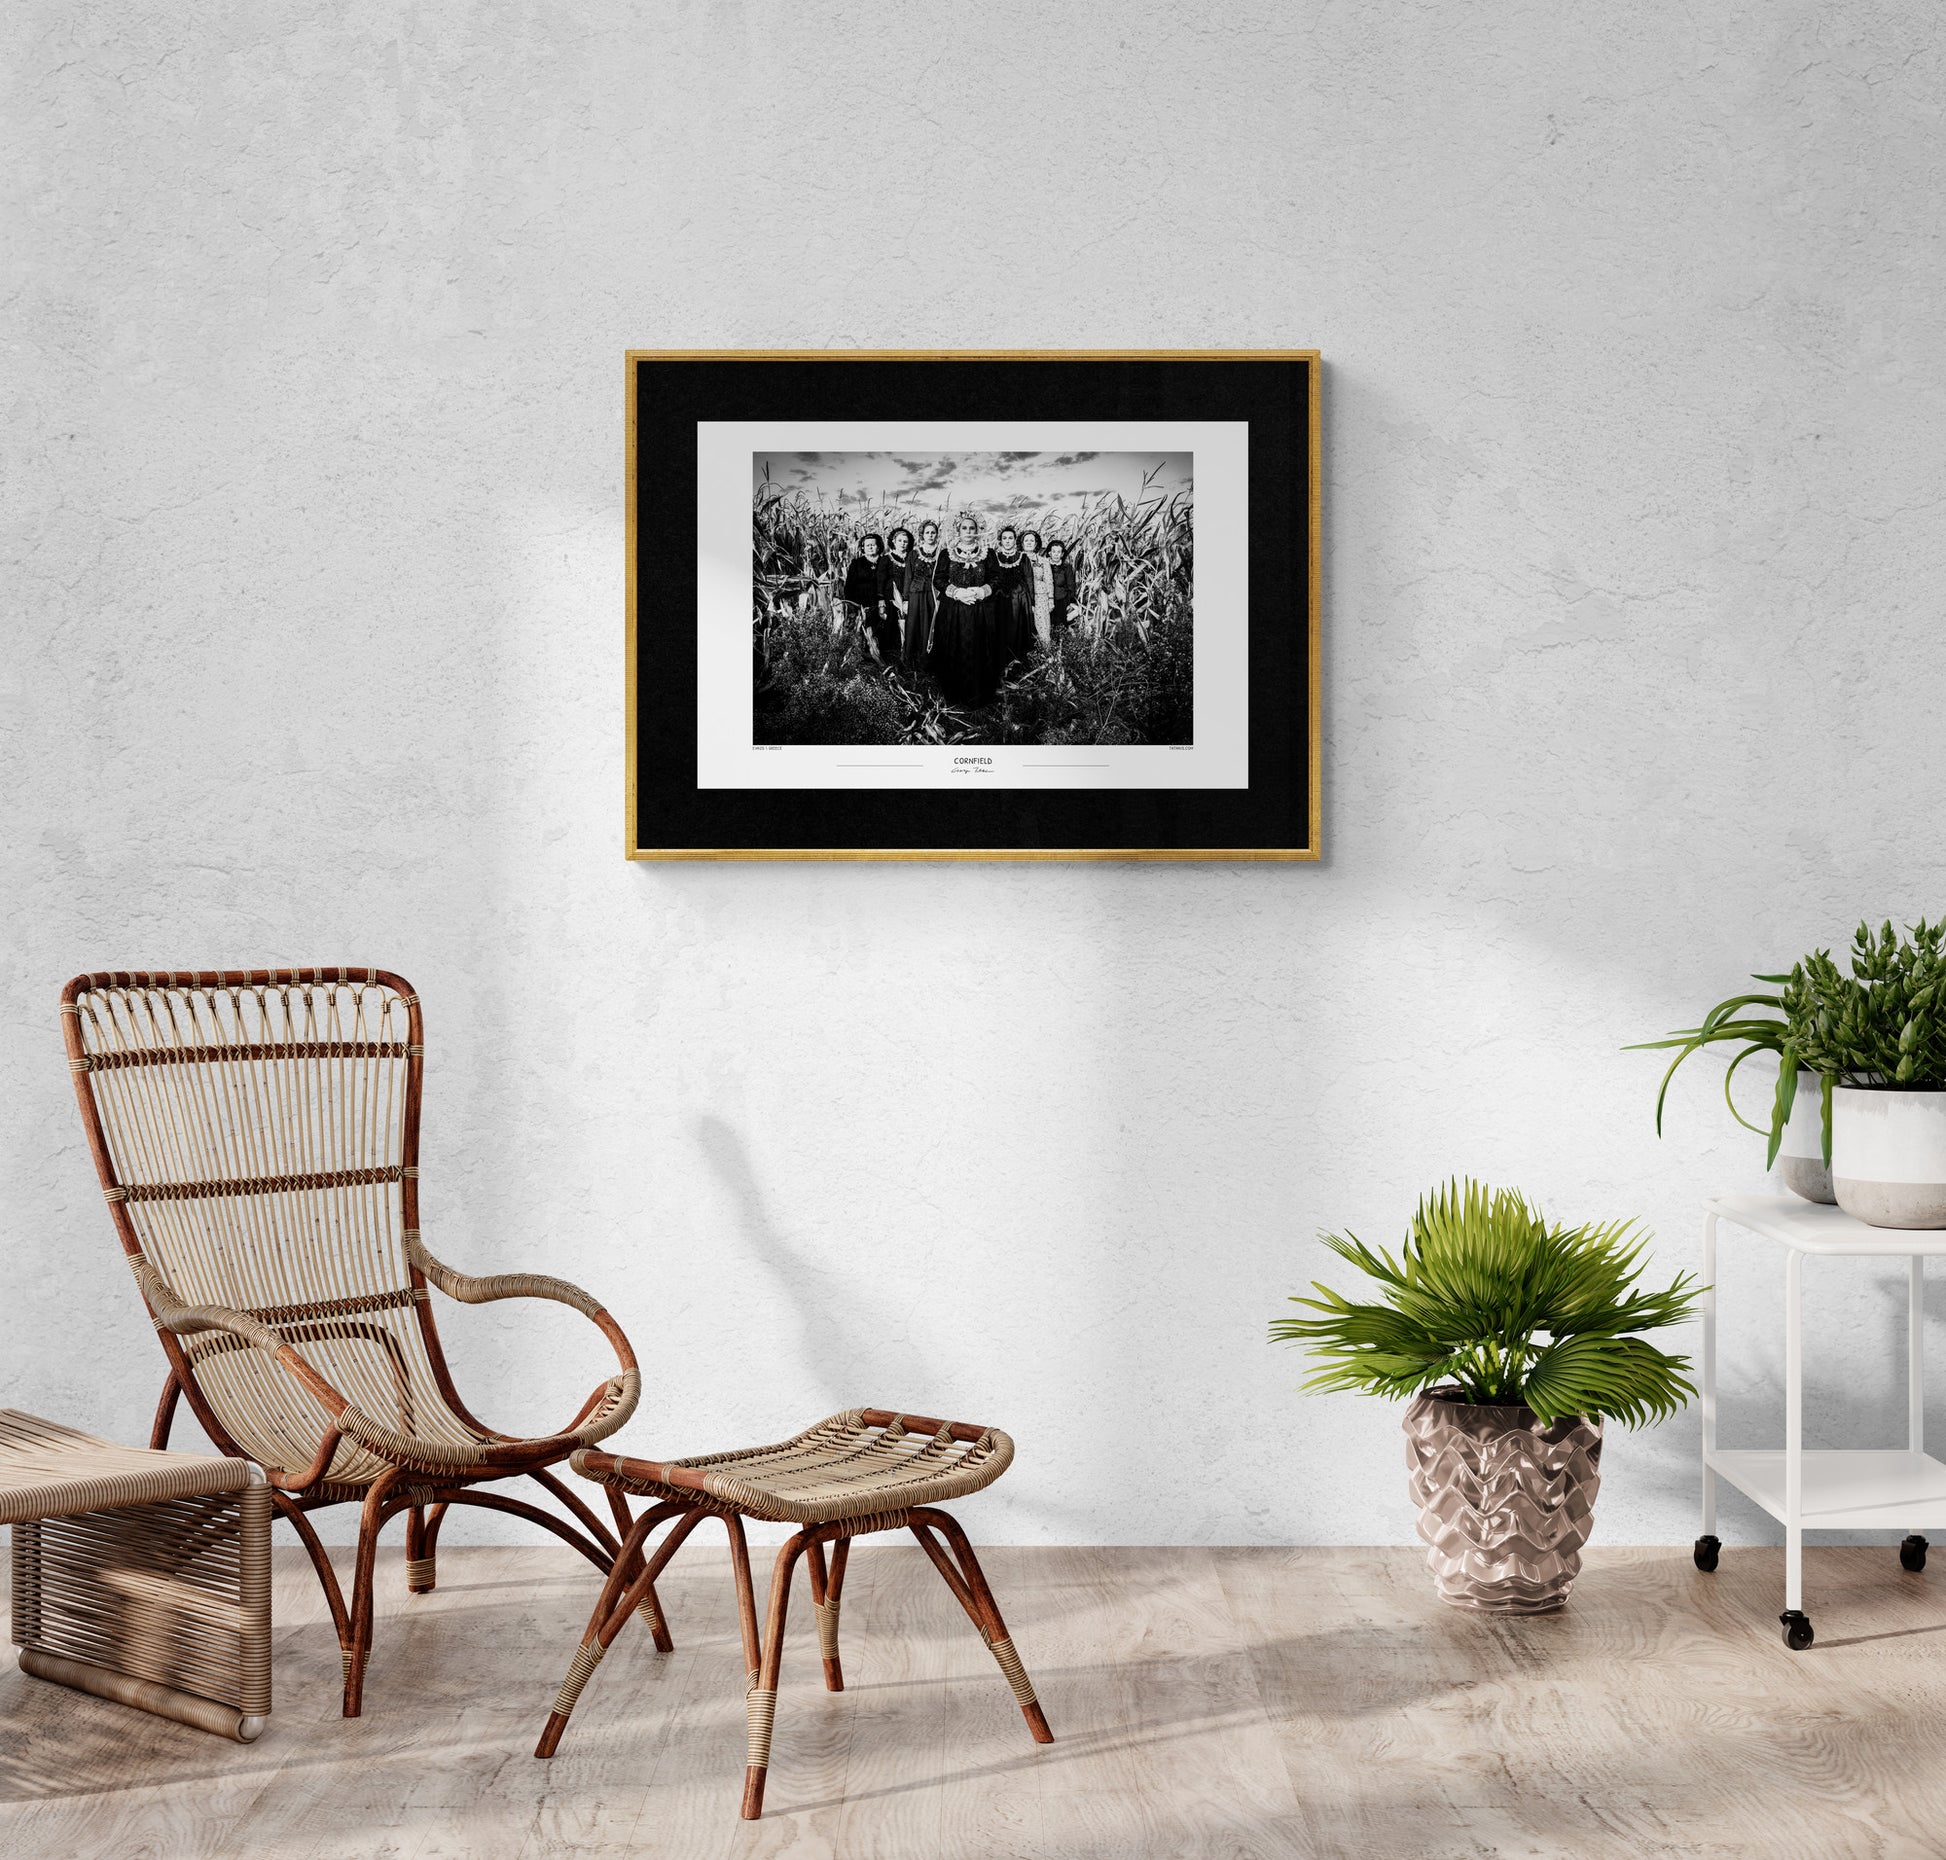 Black and White Photo Wall Art Poster from Greece | Costumes in a Cornfield, Nea Vyssa, Evros, Thrace, by George Tatakis - room with cane armchair